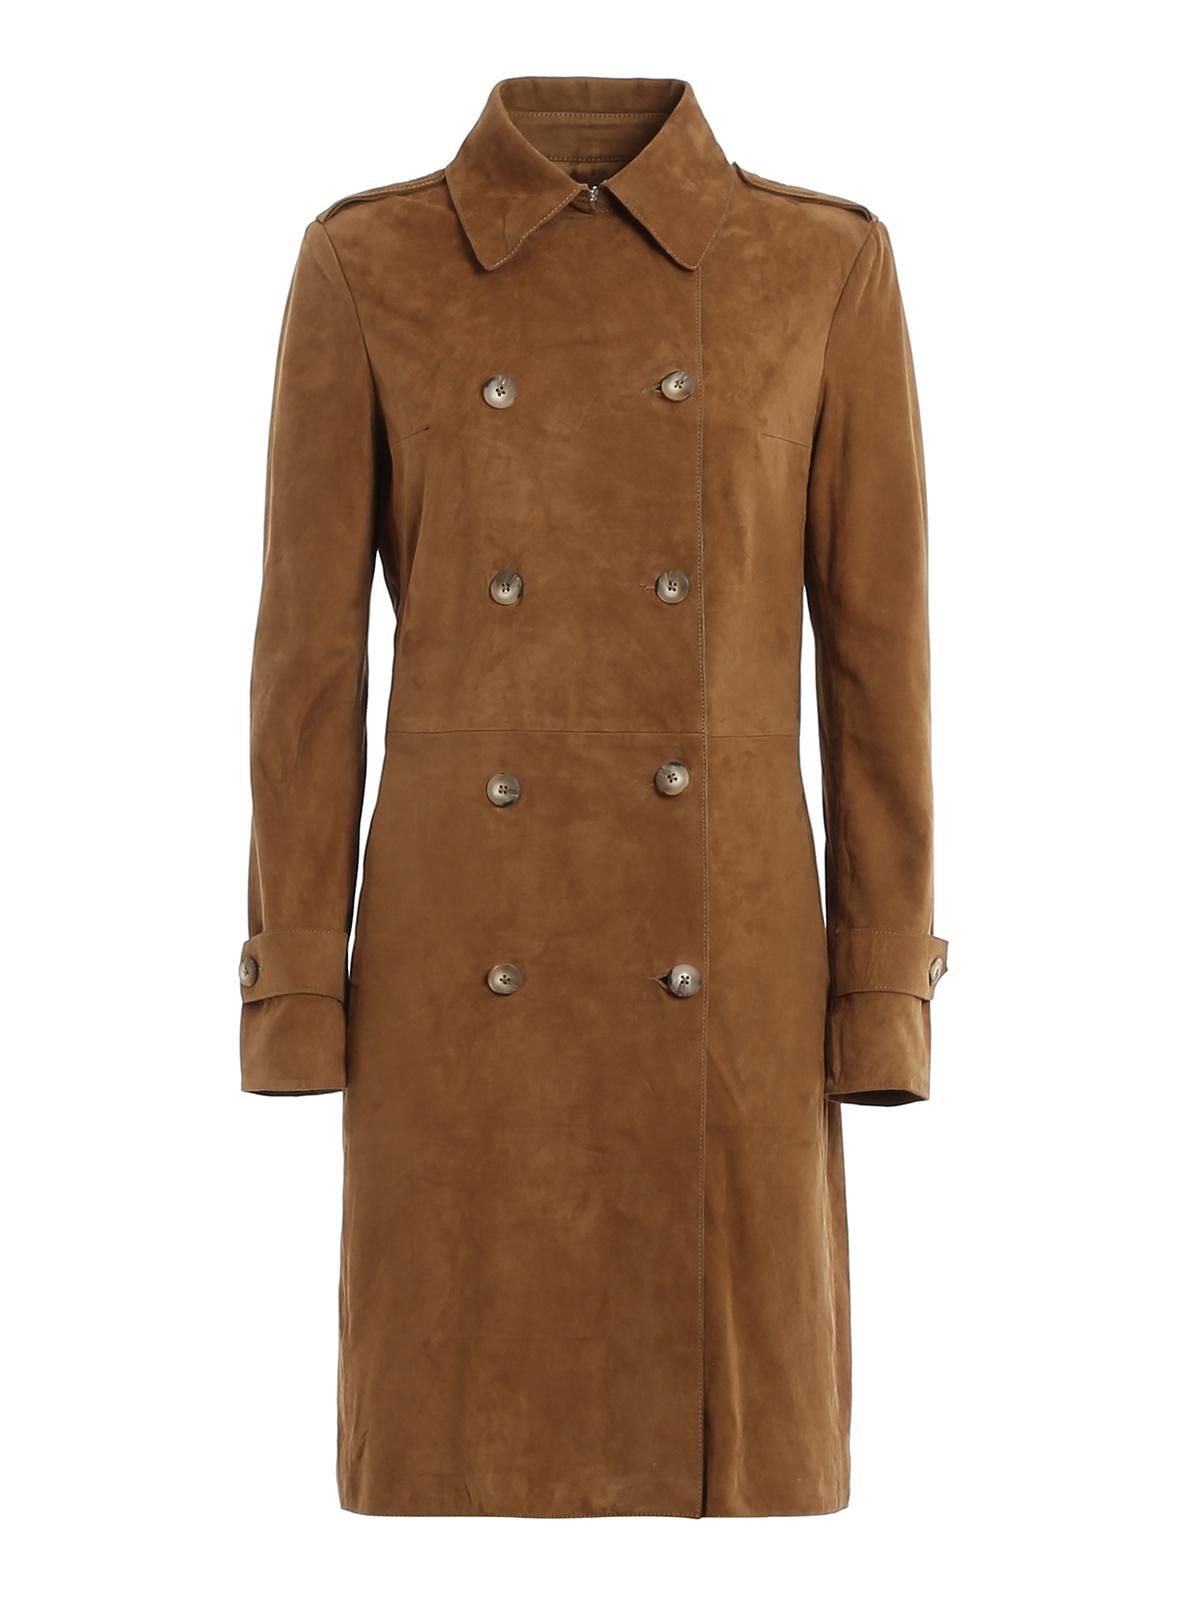 Dondup Suede Trench Coat in Light Brown (Brown) - Lyst